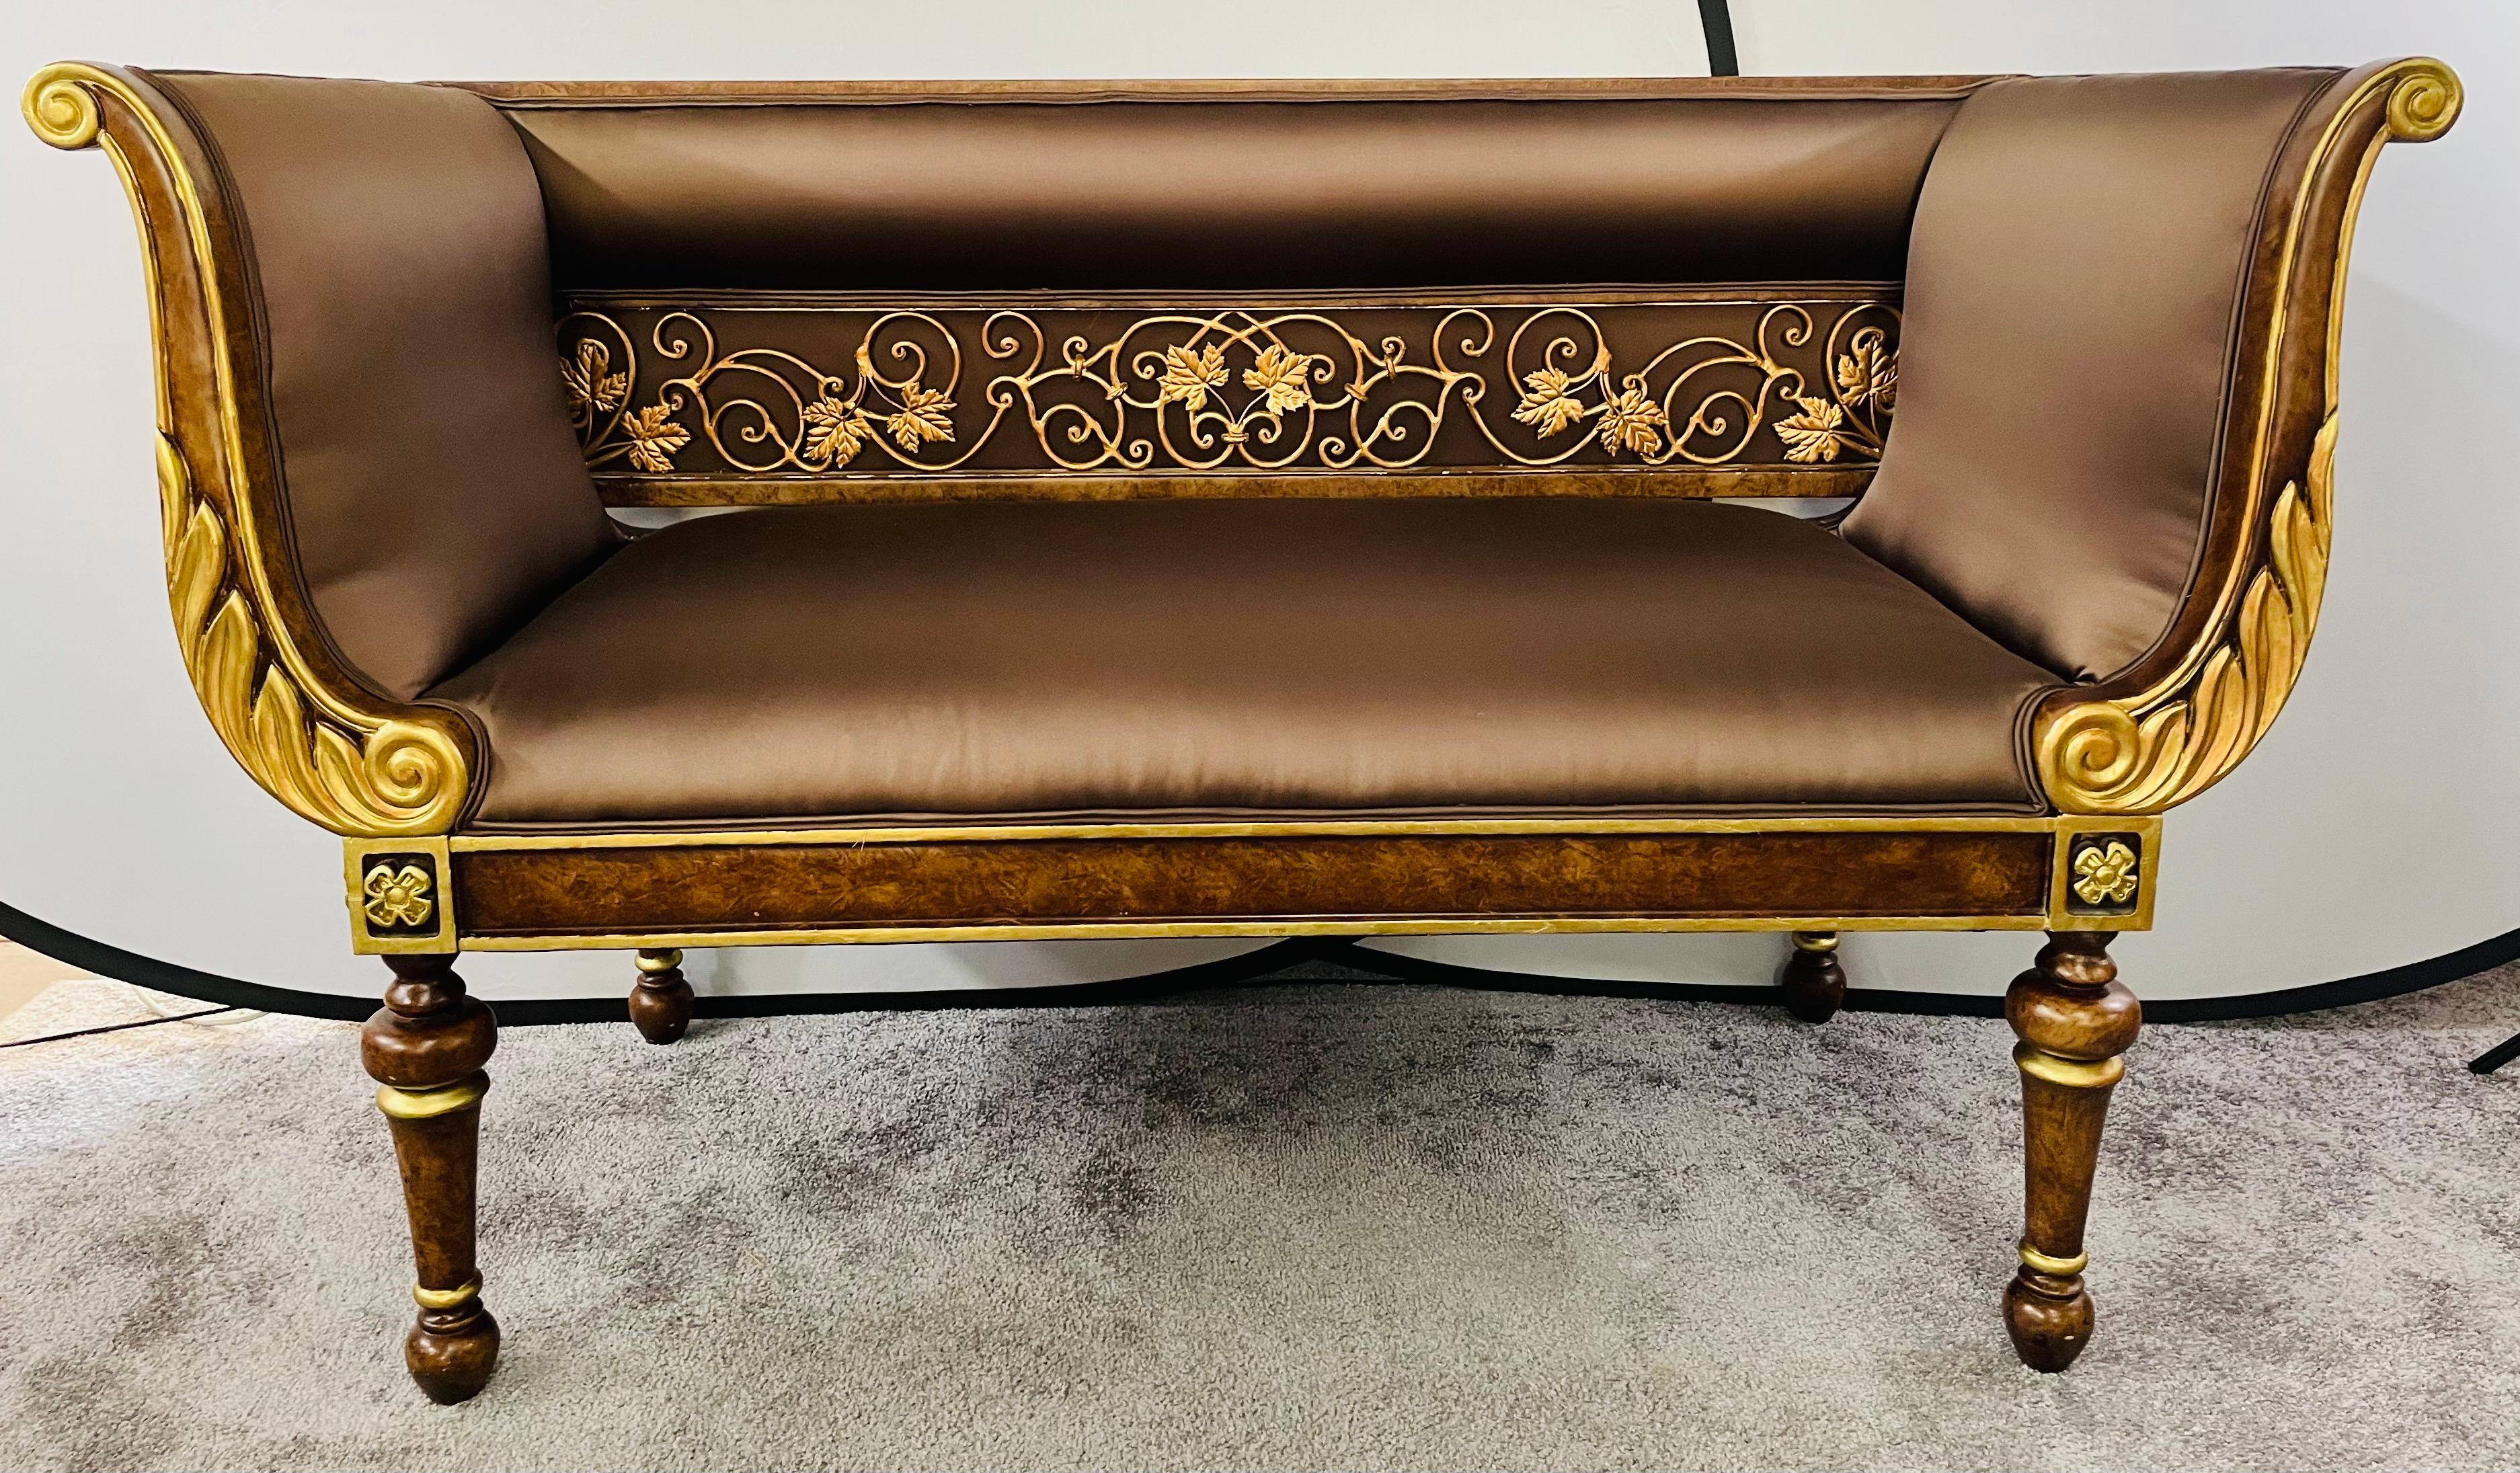 Antique Italian Venetian Burl Wood and Gilt Loveseat, Settee or Canapé In Good Condition For Sale In Plainview, NY